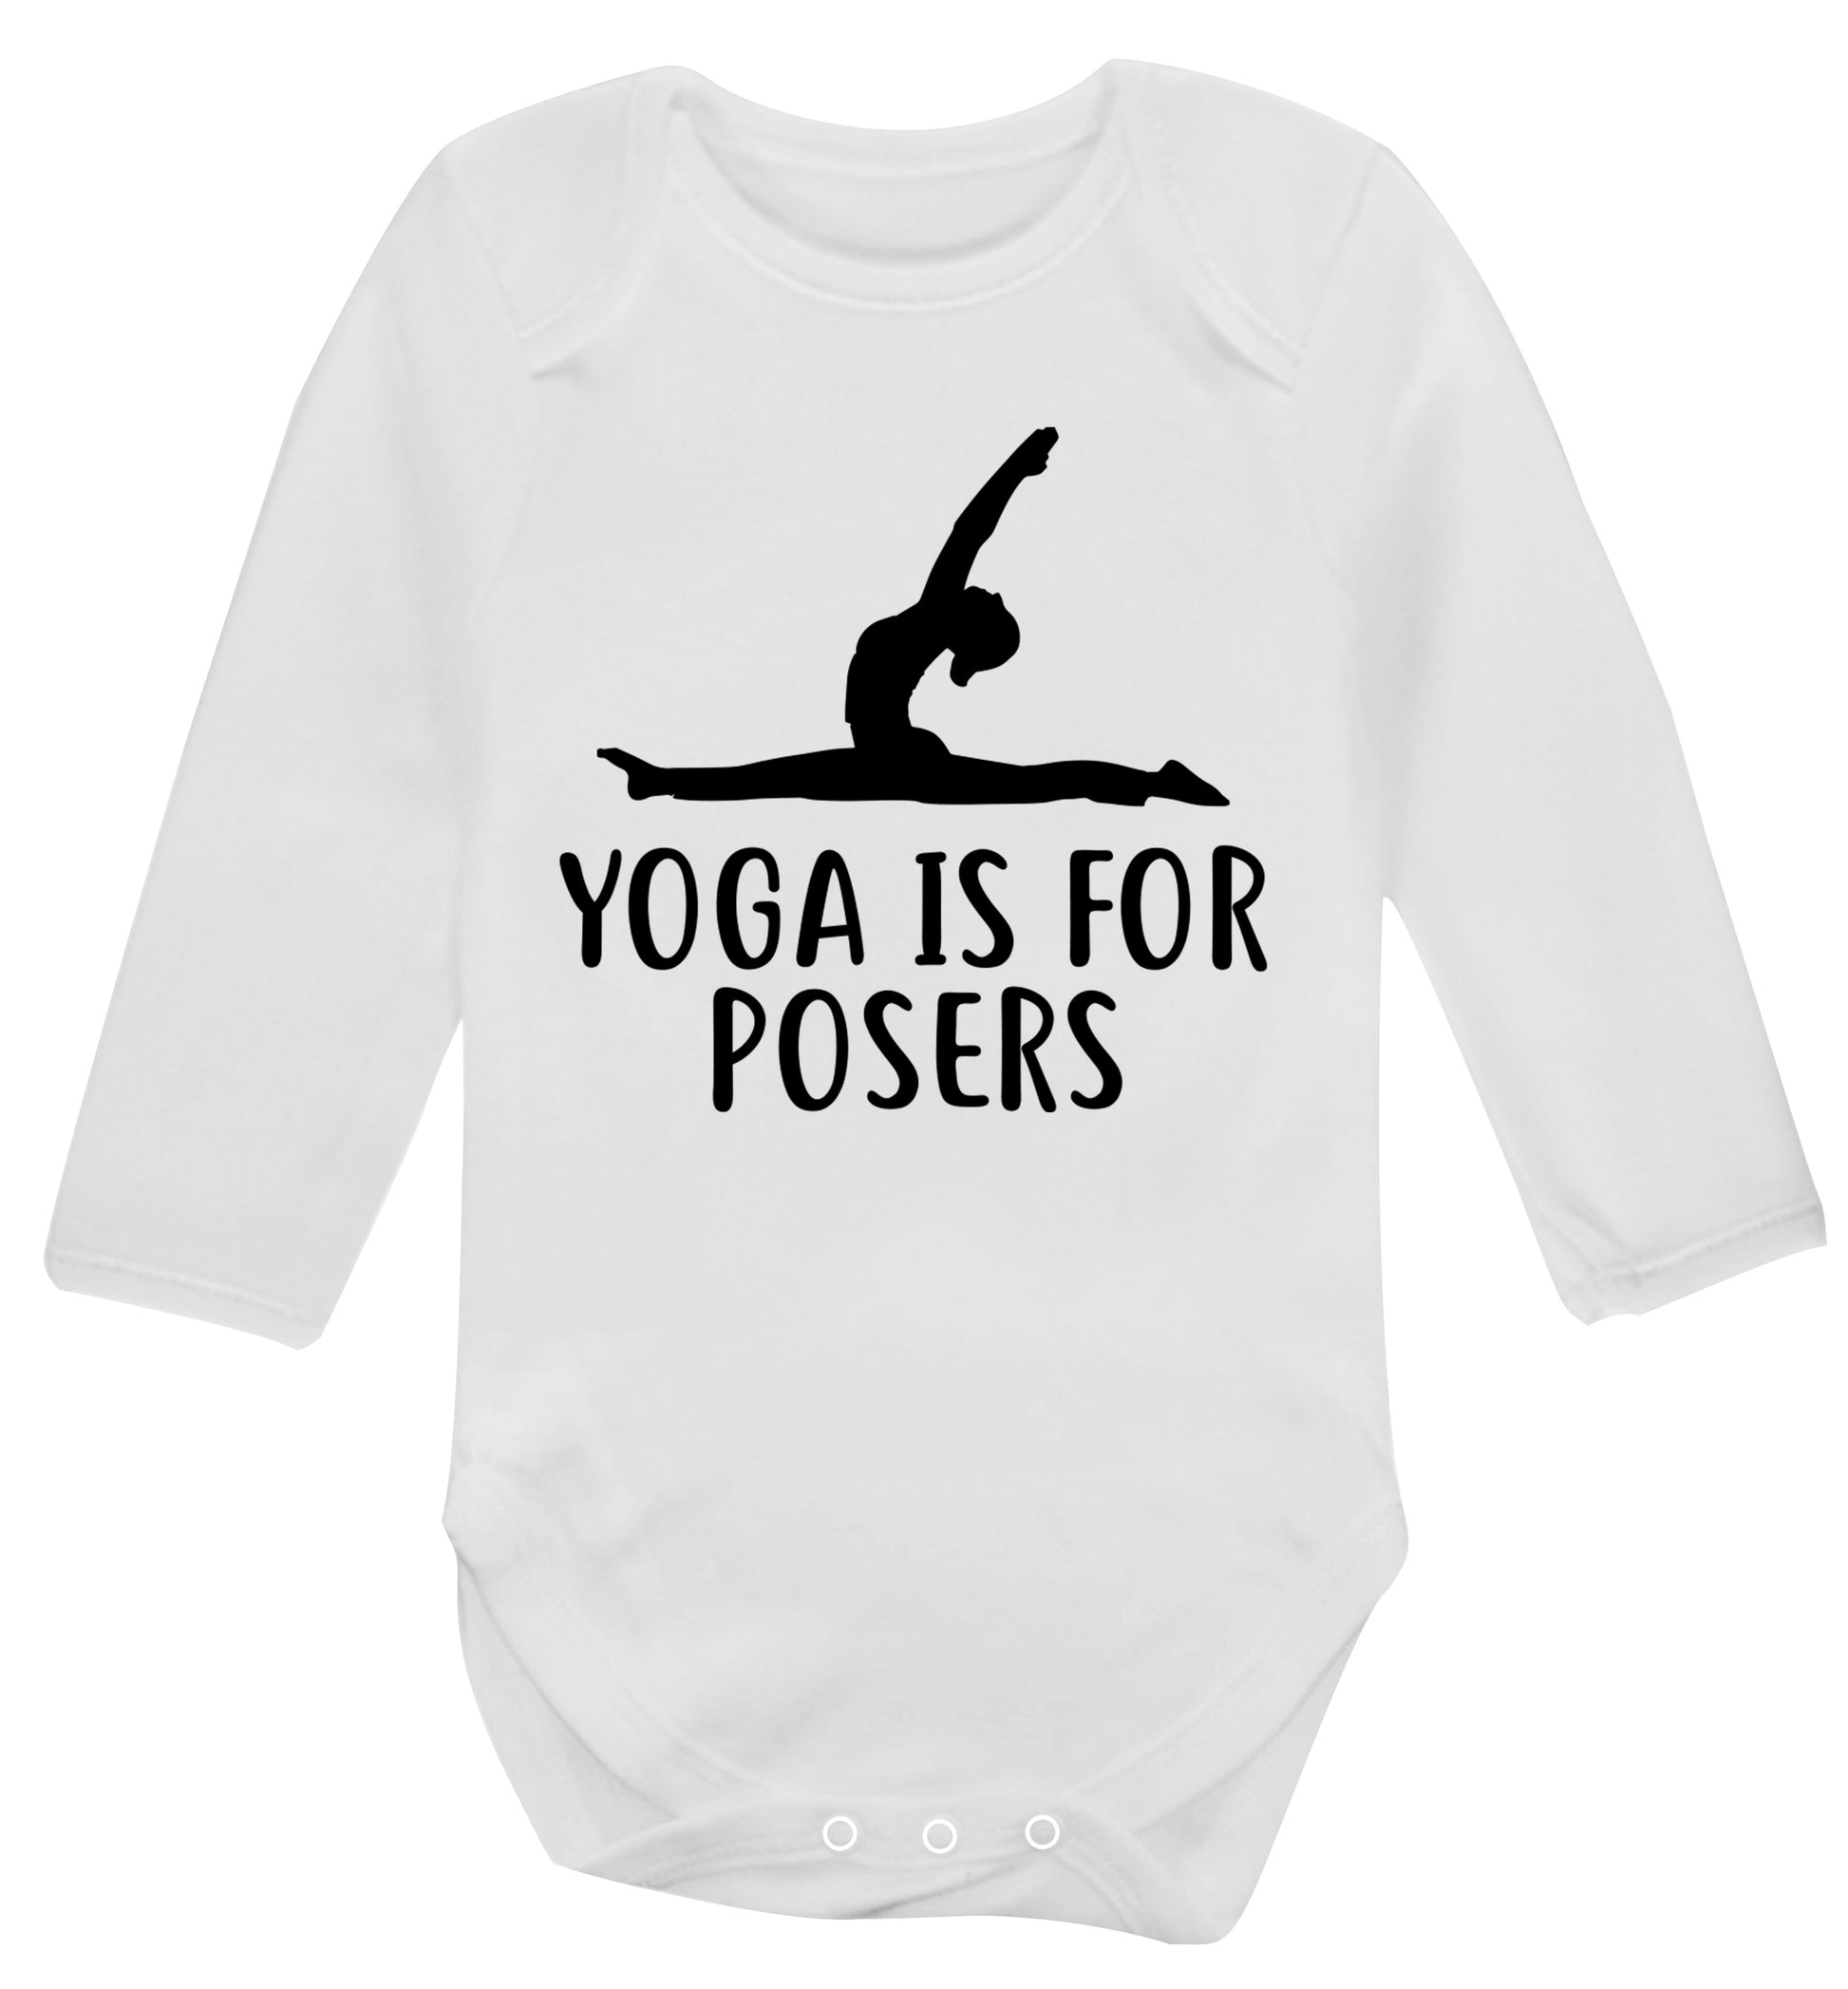 Yoga is for posers Baby Vest long sleeved white 6-12 months